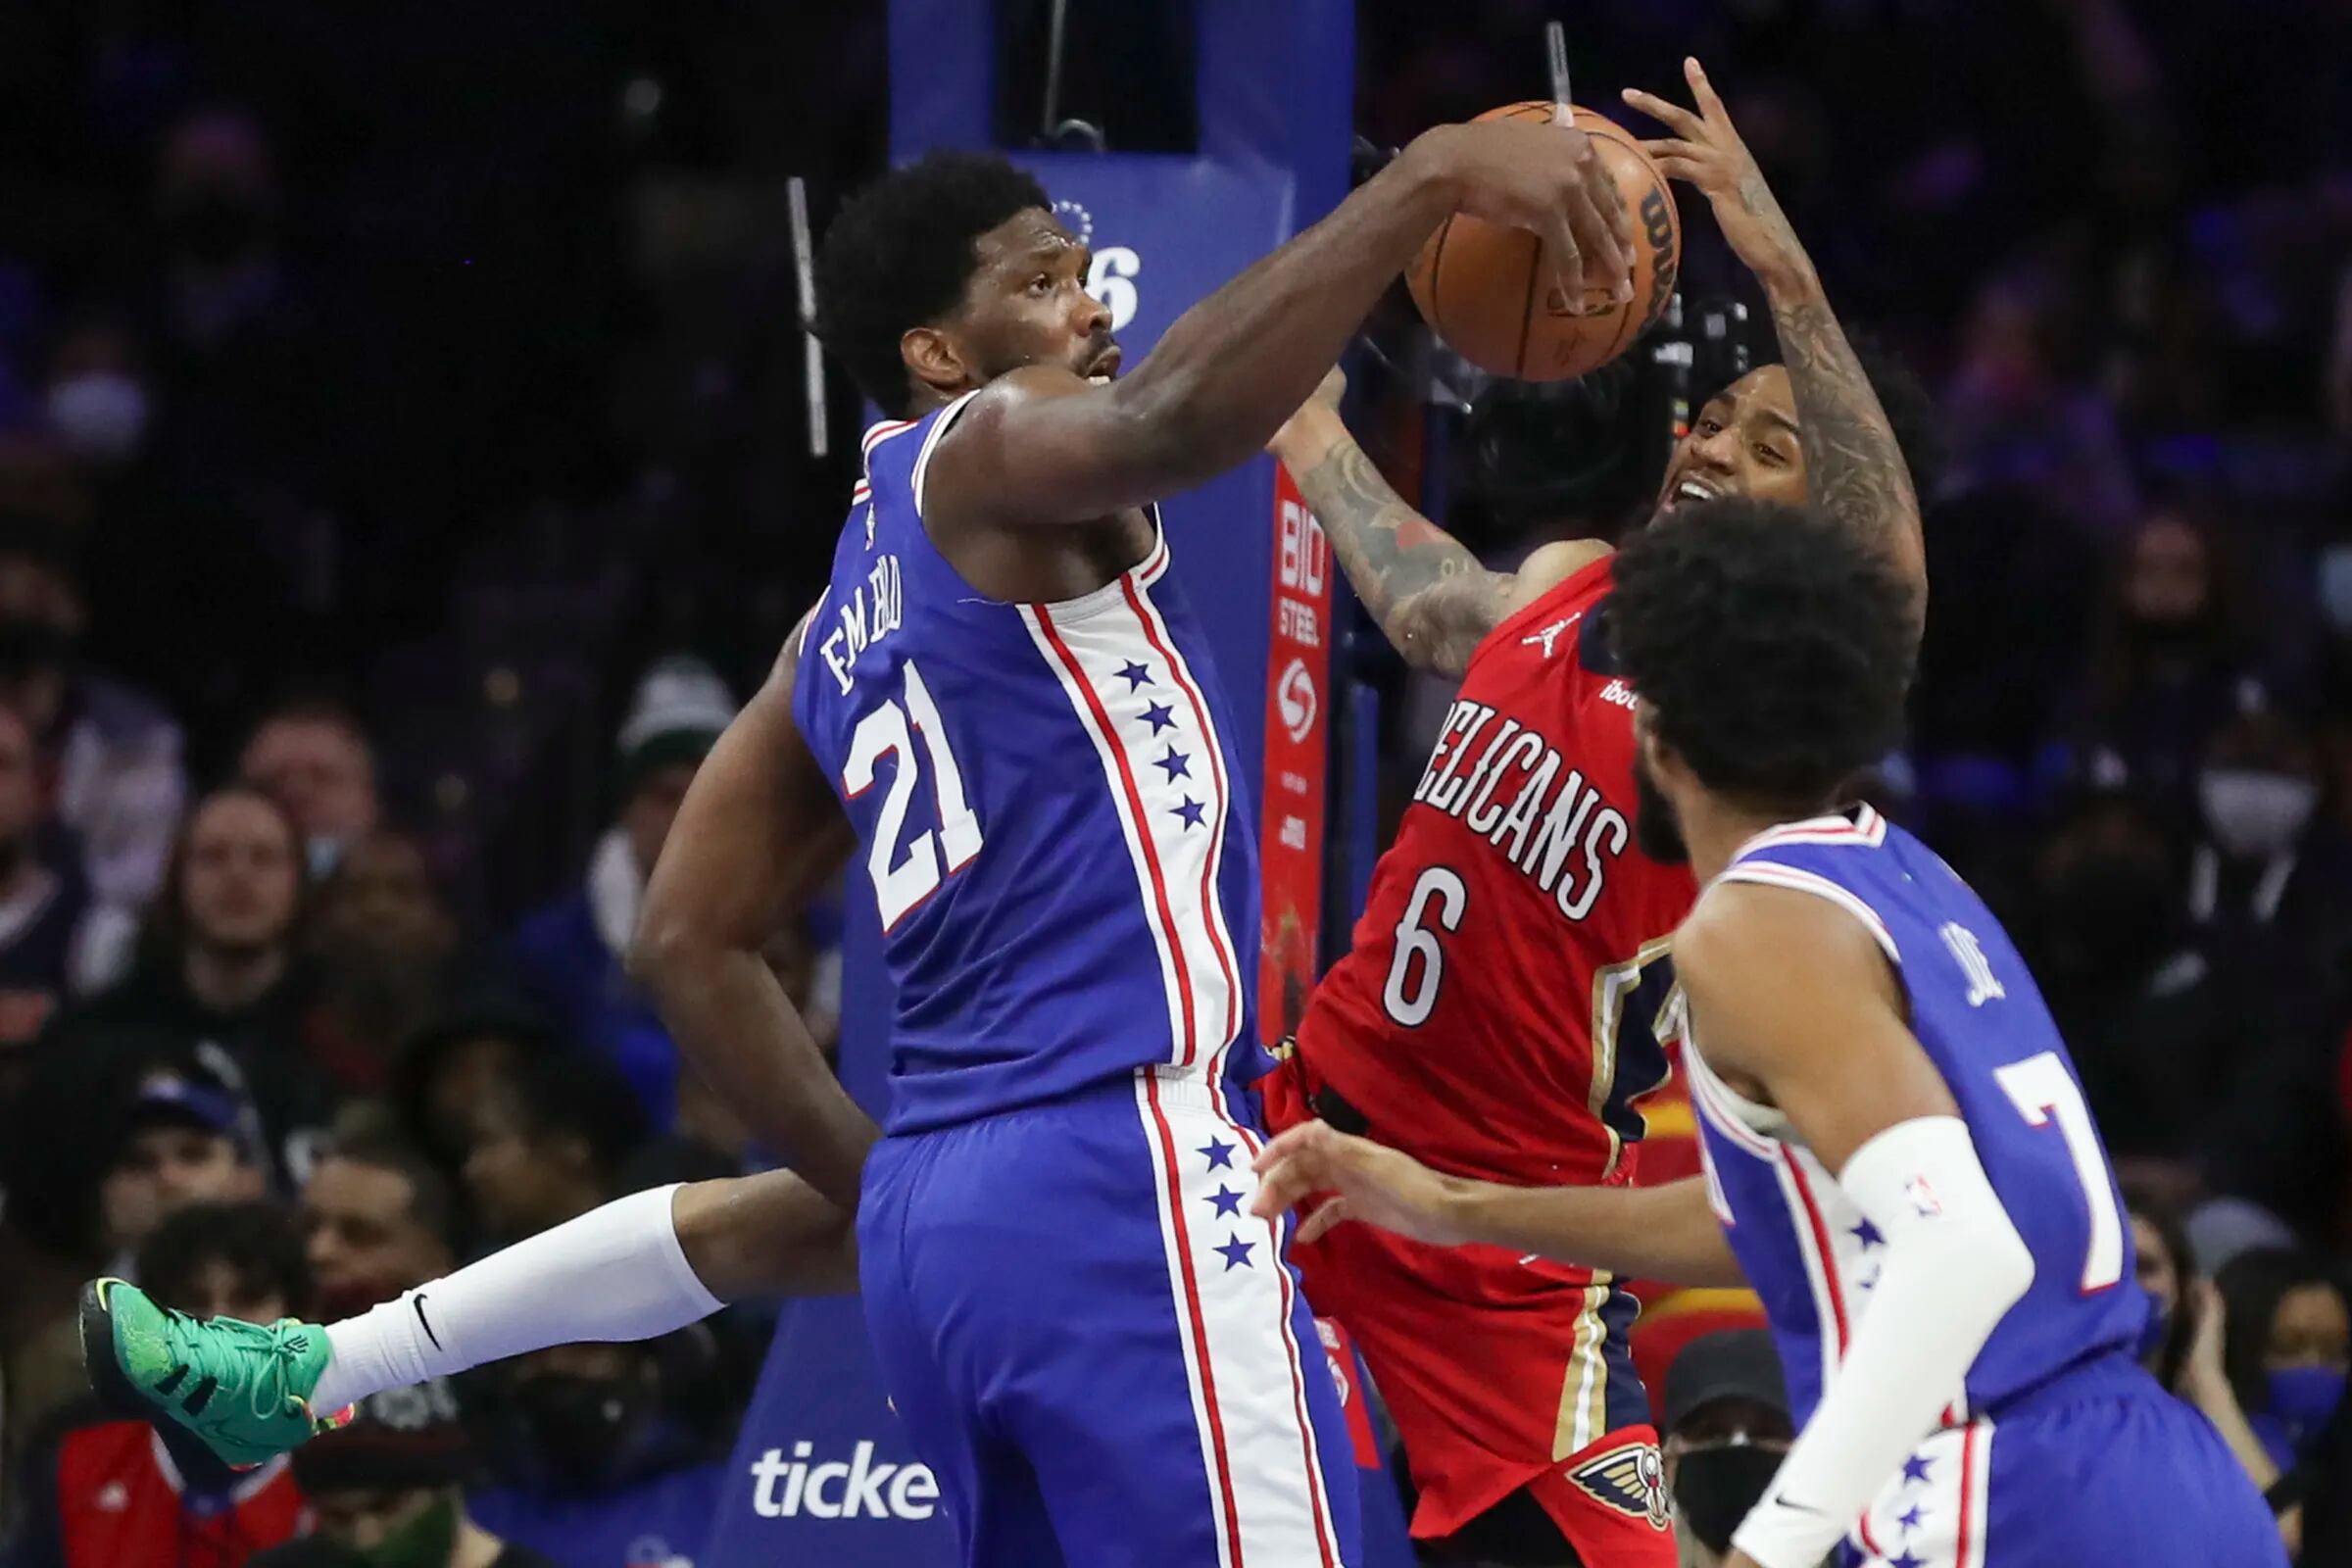 Sixers vs. Celtics Game 6 takeaways: Sixers crumbling, lacking trust, Joel  Embiid standing by